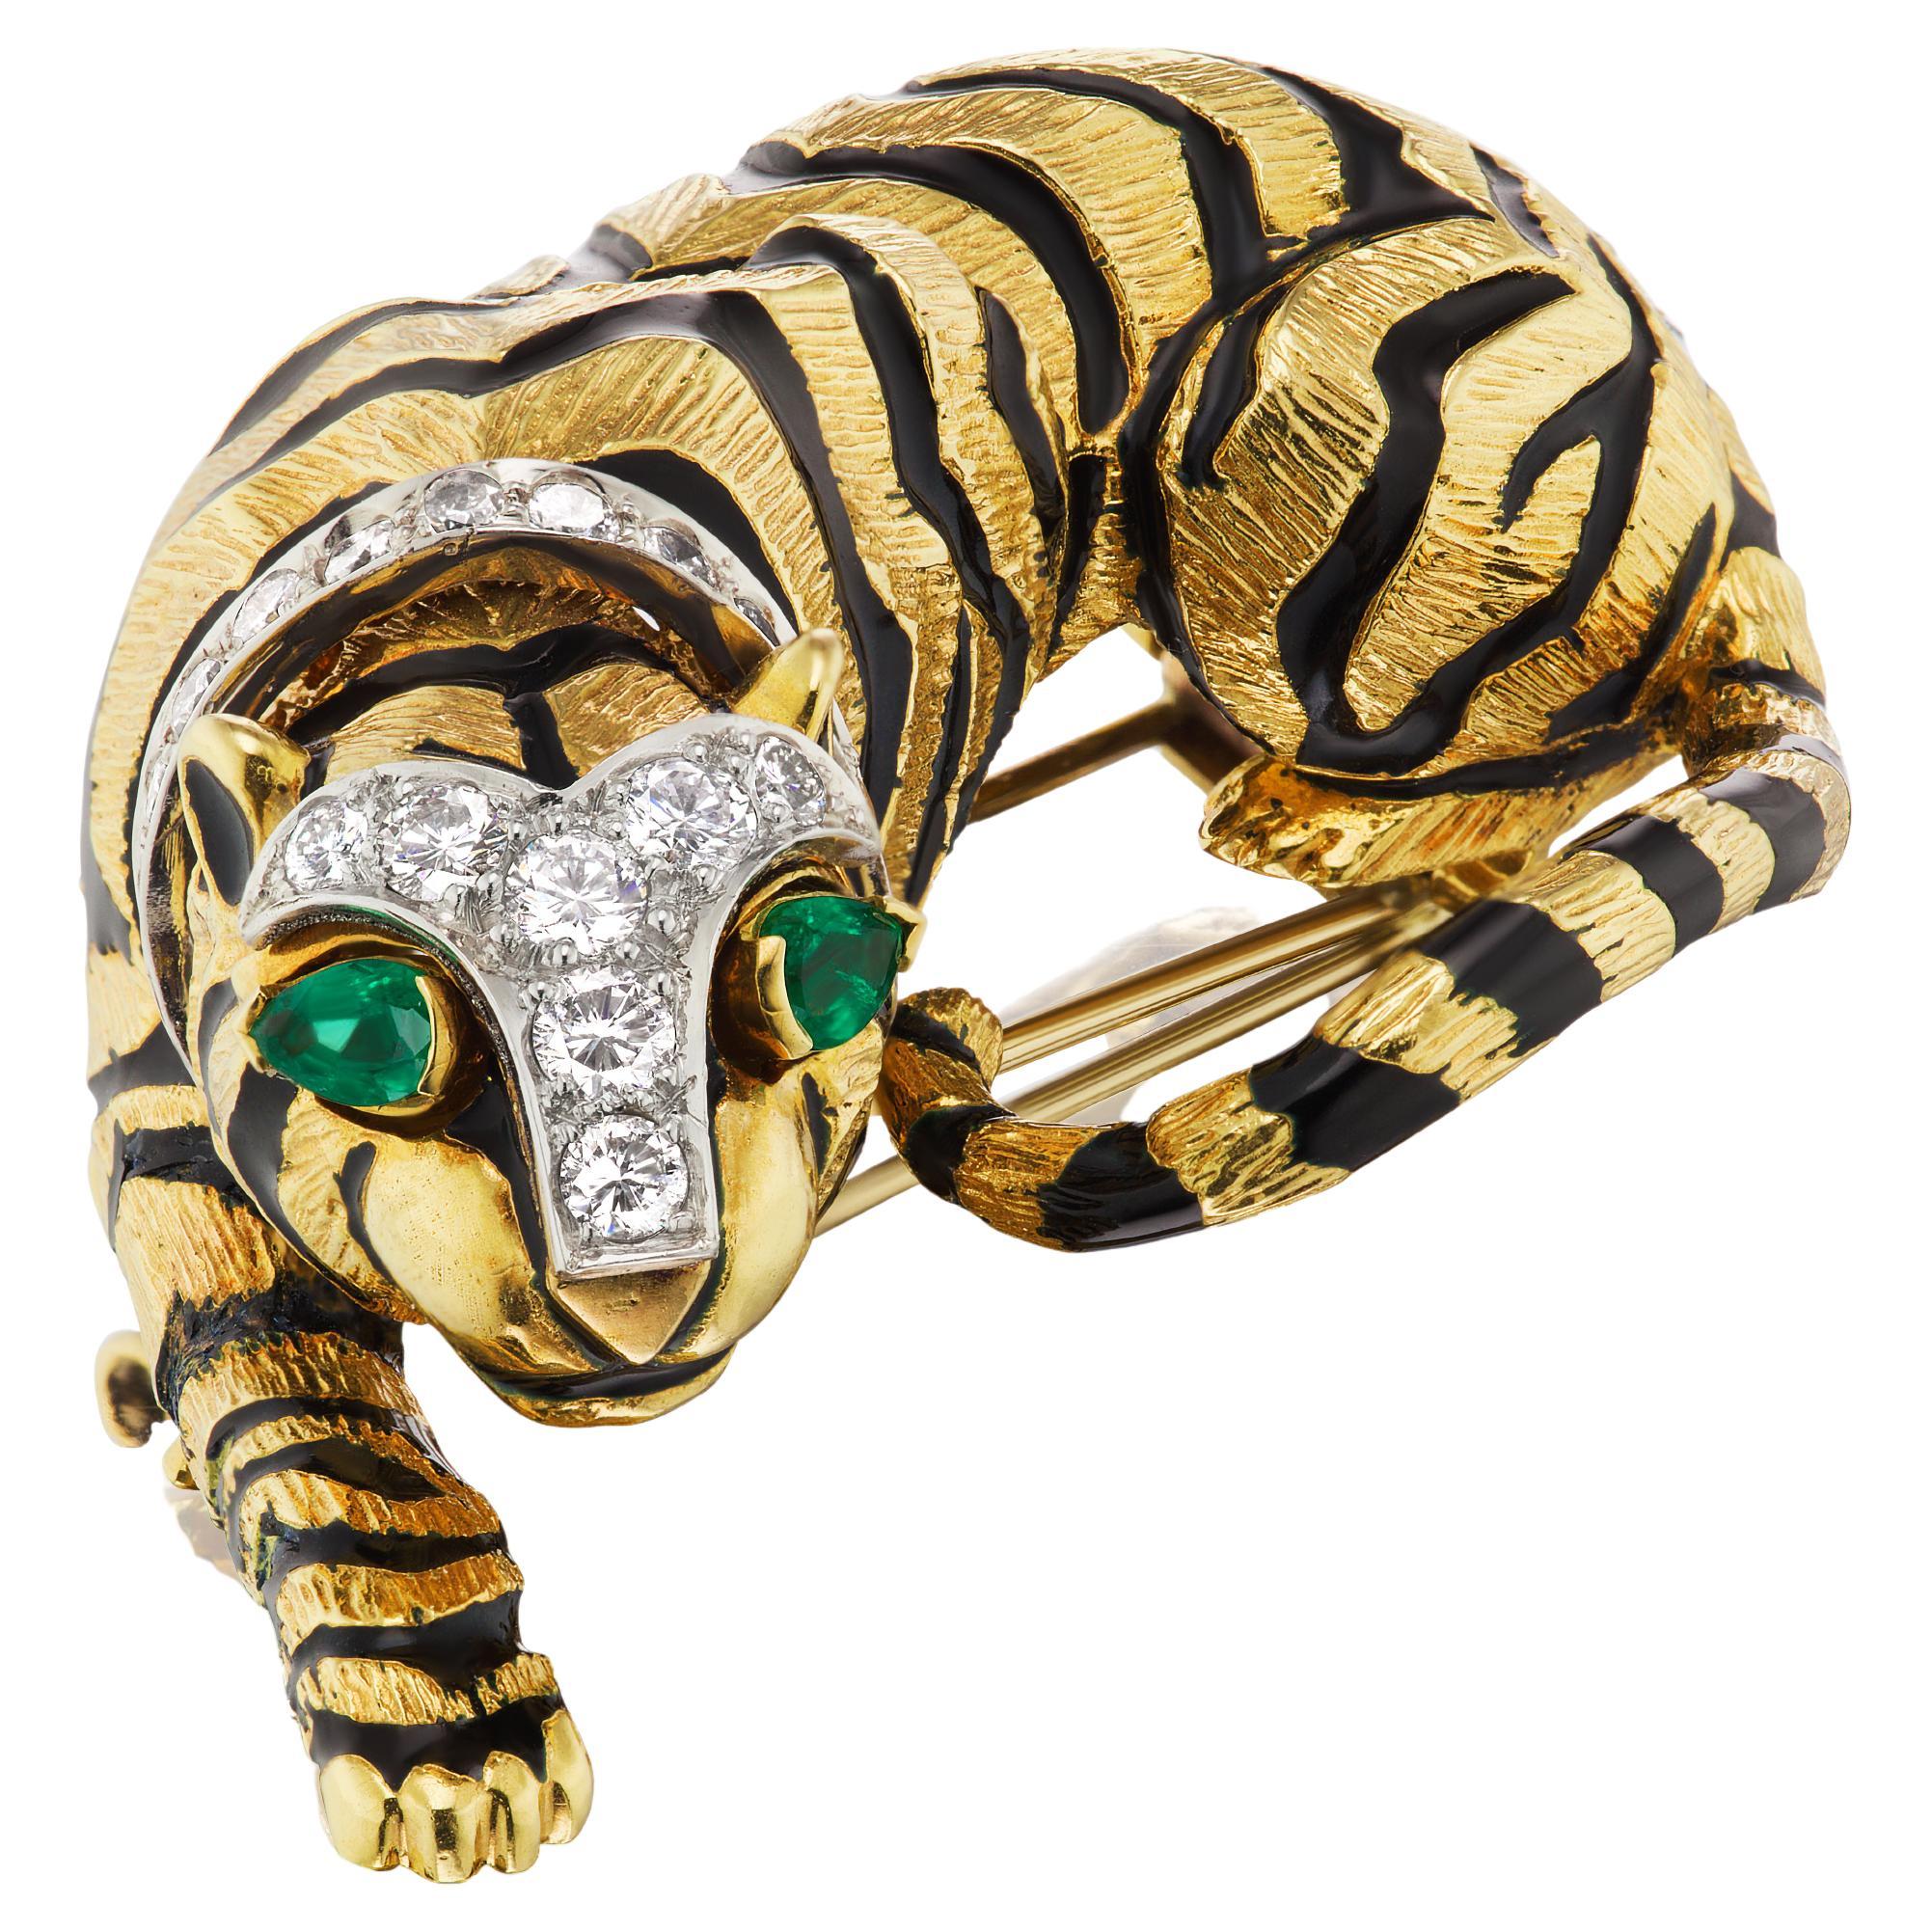 Details about   Stunning Art Deco Style Enamel Crystal TIGER SPIDER BROOCH Pin Jewellery 